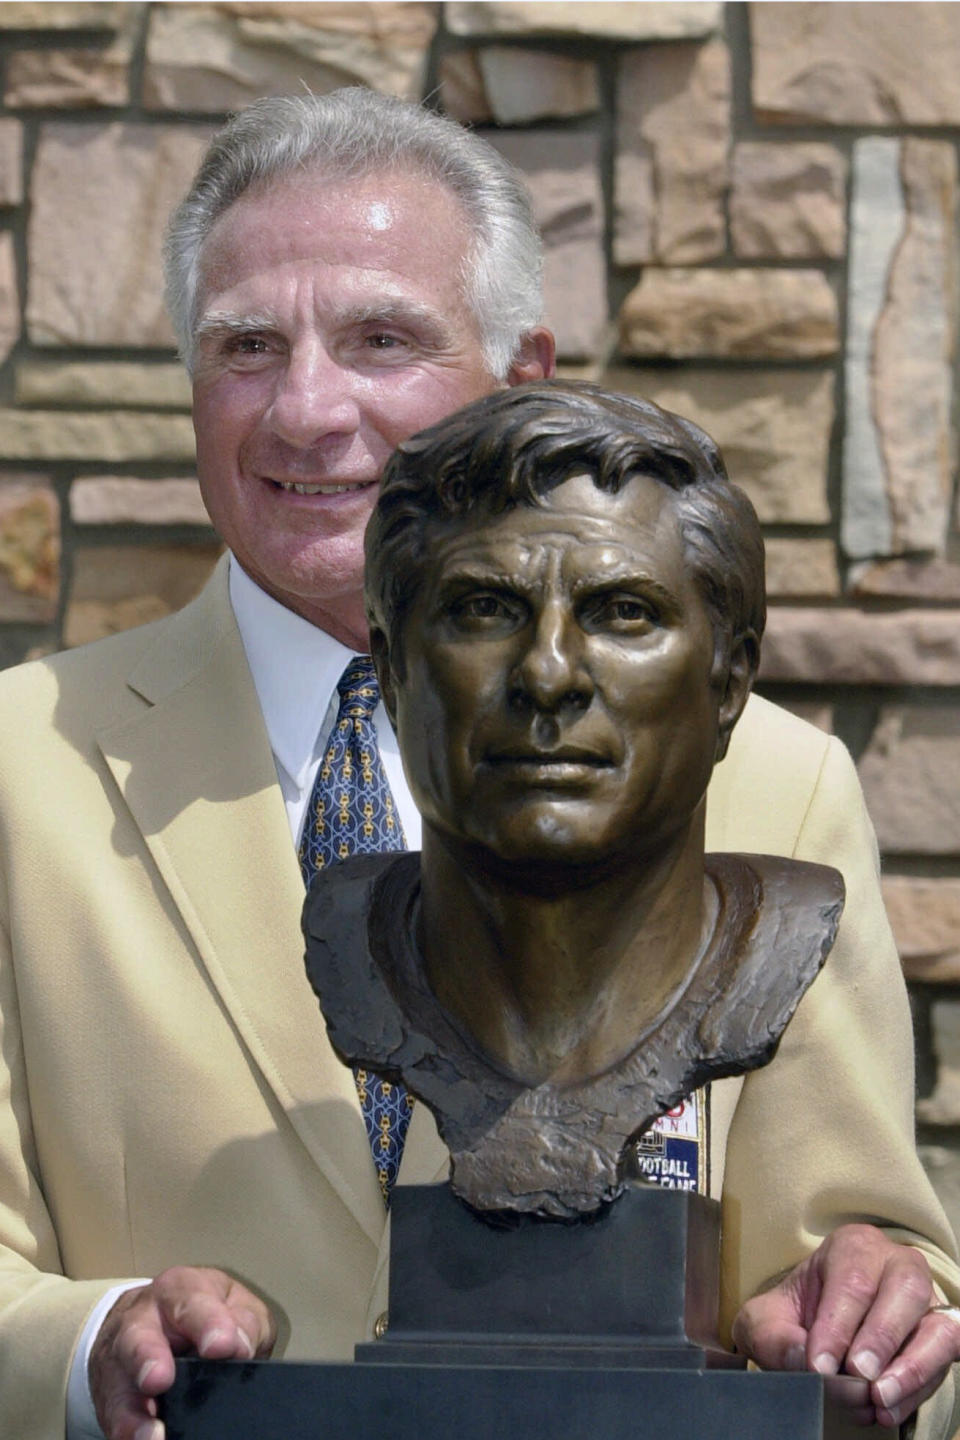 FILE - In this Aug. 4, 2001, file photo, former Miami Dolphins great Nick Buoniconti holds his bronze bust after enshrinement into the Pro Football Hall of Fame in Canton, Ohio. Nick Buoniconti, an undersized overachiever who helped lead the Miami Dolphins to the NFL's only perfect season, has died at the age of 78. Bruce Bobbins, a spokesman for the Buoniconti family, said he died Tuesday, July 30, 2019, in Bridgehampton, N.Y. (AP Photo/Mark Duncan)